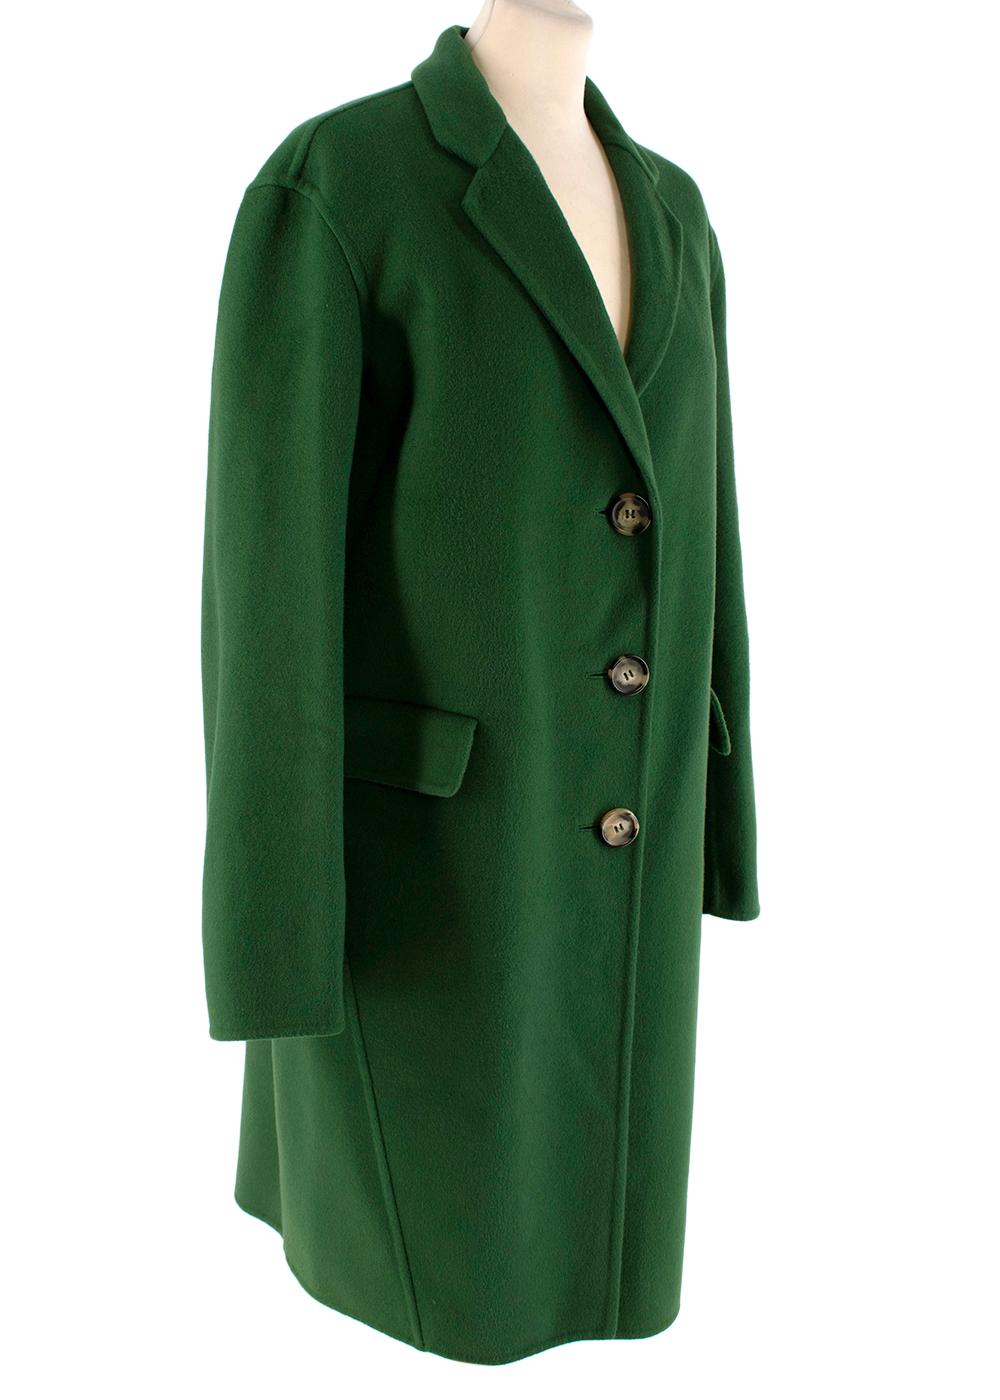 Ermanno Scervino Deep Green Felted Wool Mid-Length Coat

- Felted wool in deep green
- Notched lapels
- Single breasted button up fastening
- Two front flap pockets
- Single vented
- Partially lined design

Materials:
100%